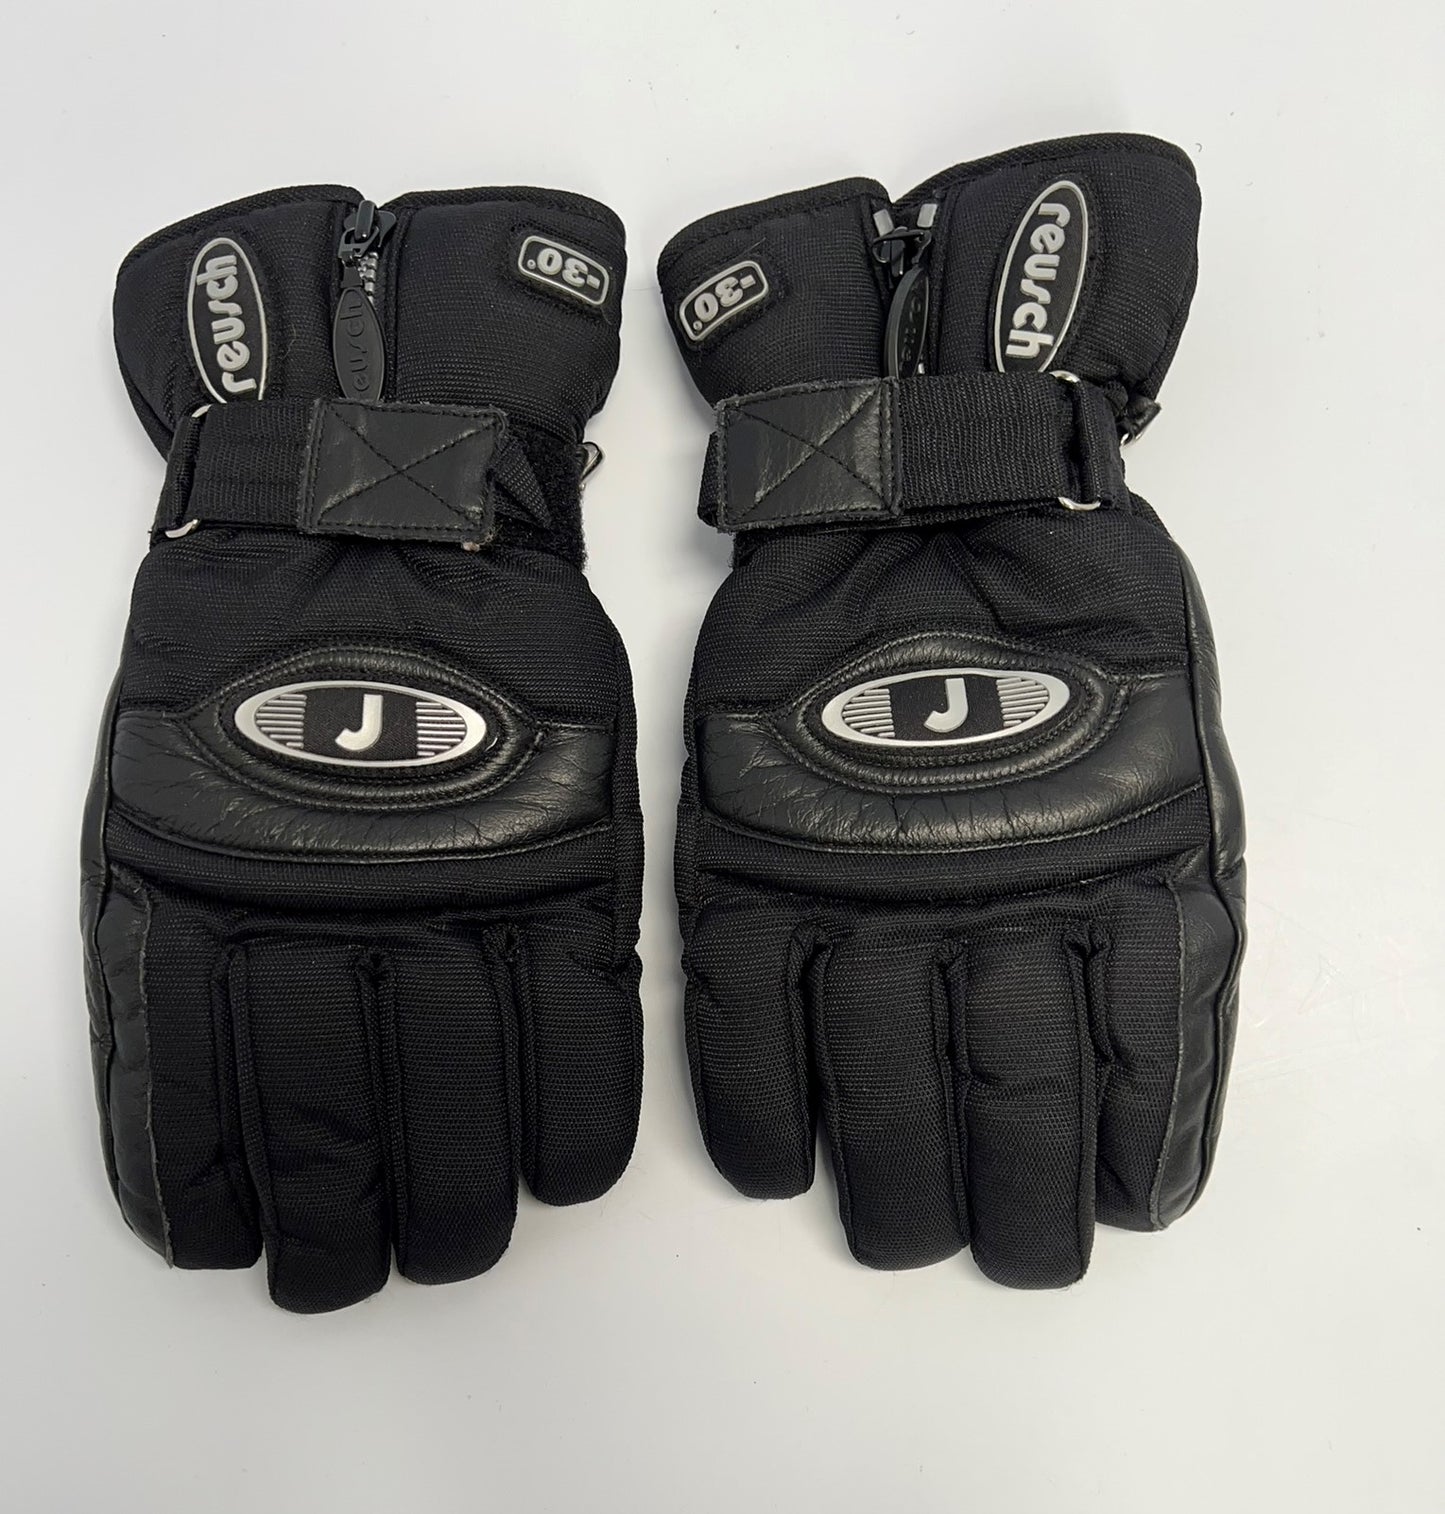 Winter Gloves and Mitts Men's Size Large Reusch -30 Degree Professional Ski Gear Leather Palms Made In Italy As New Outstanding Quality